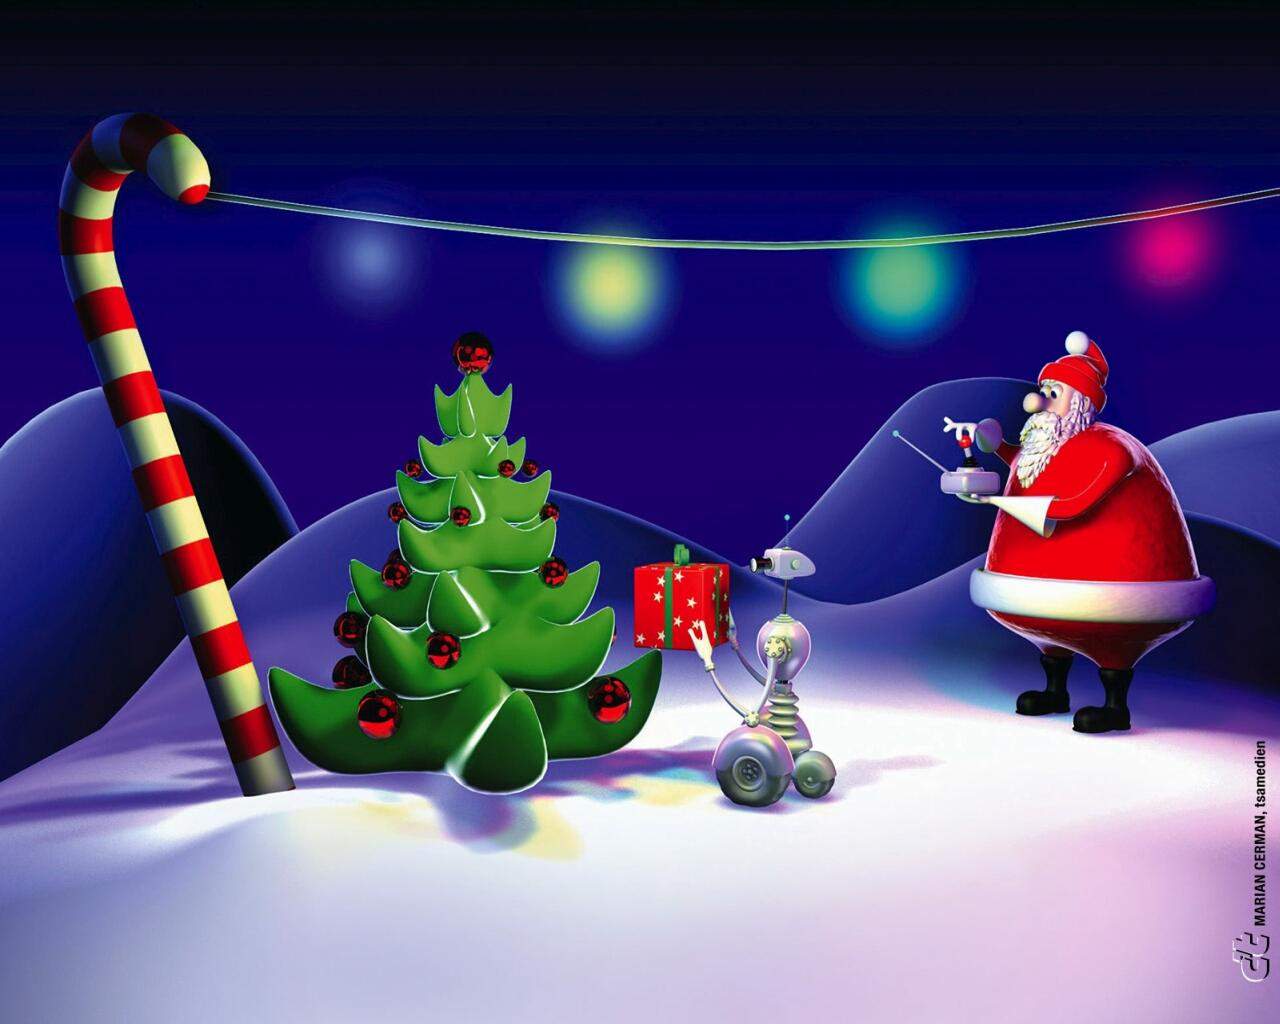 imageswallpapersmelacom2014123d Animated Christmas Wallpapers